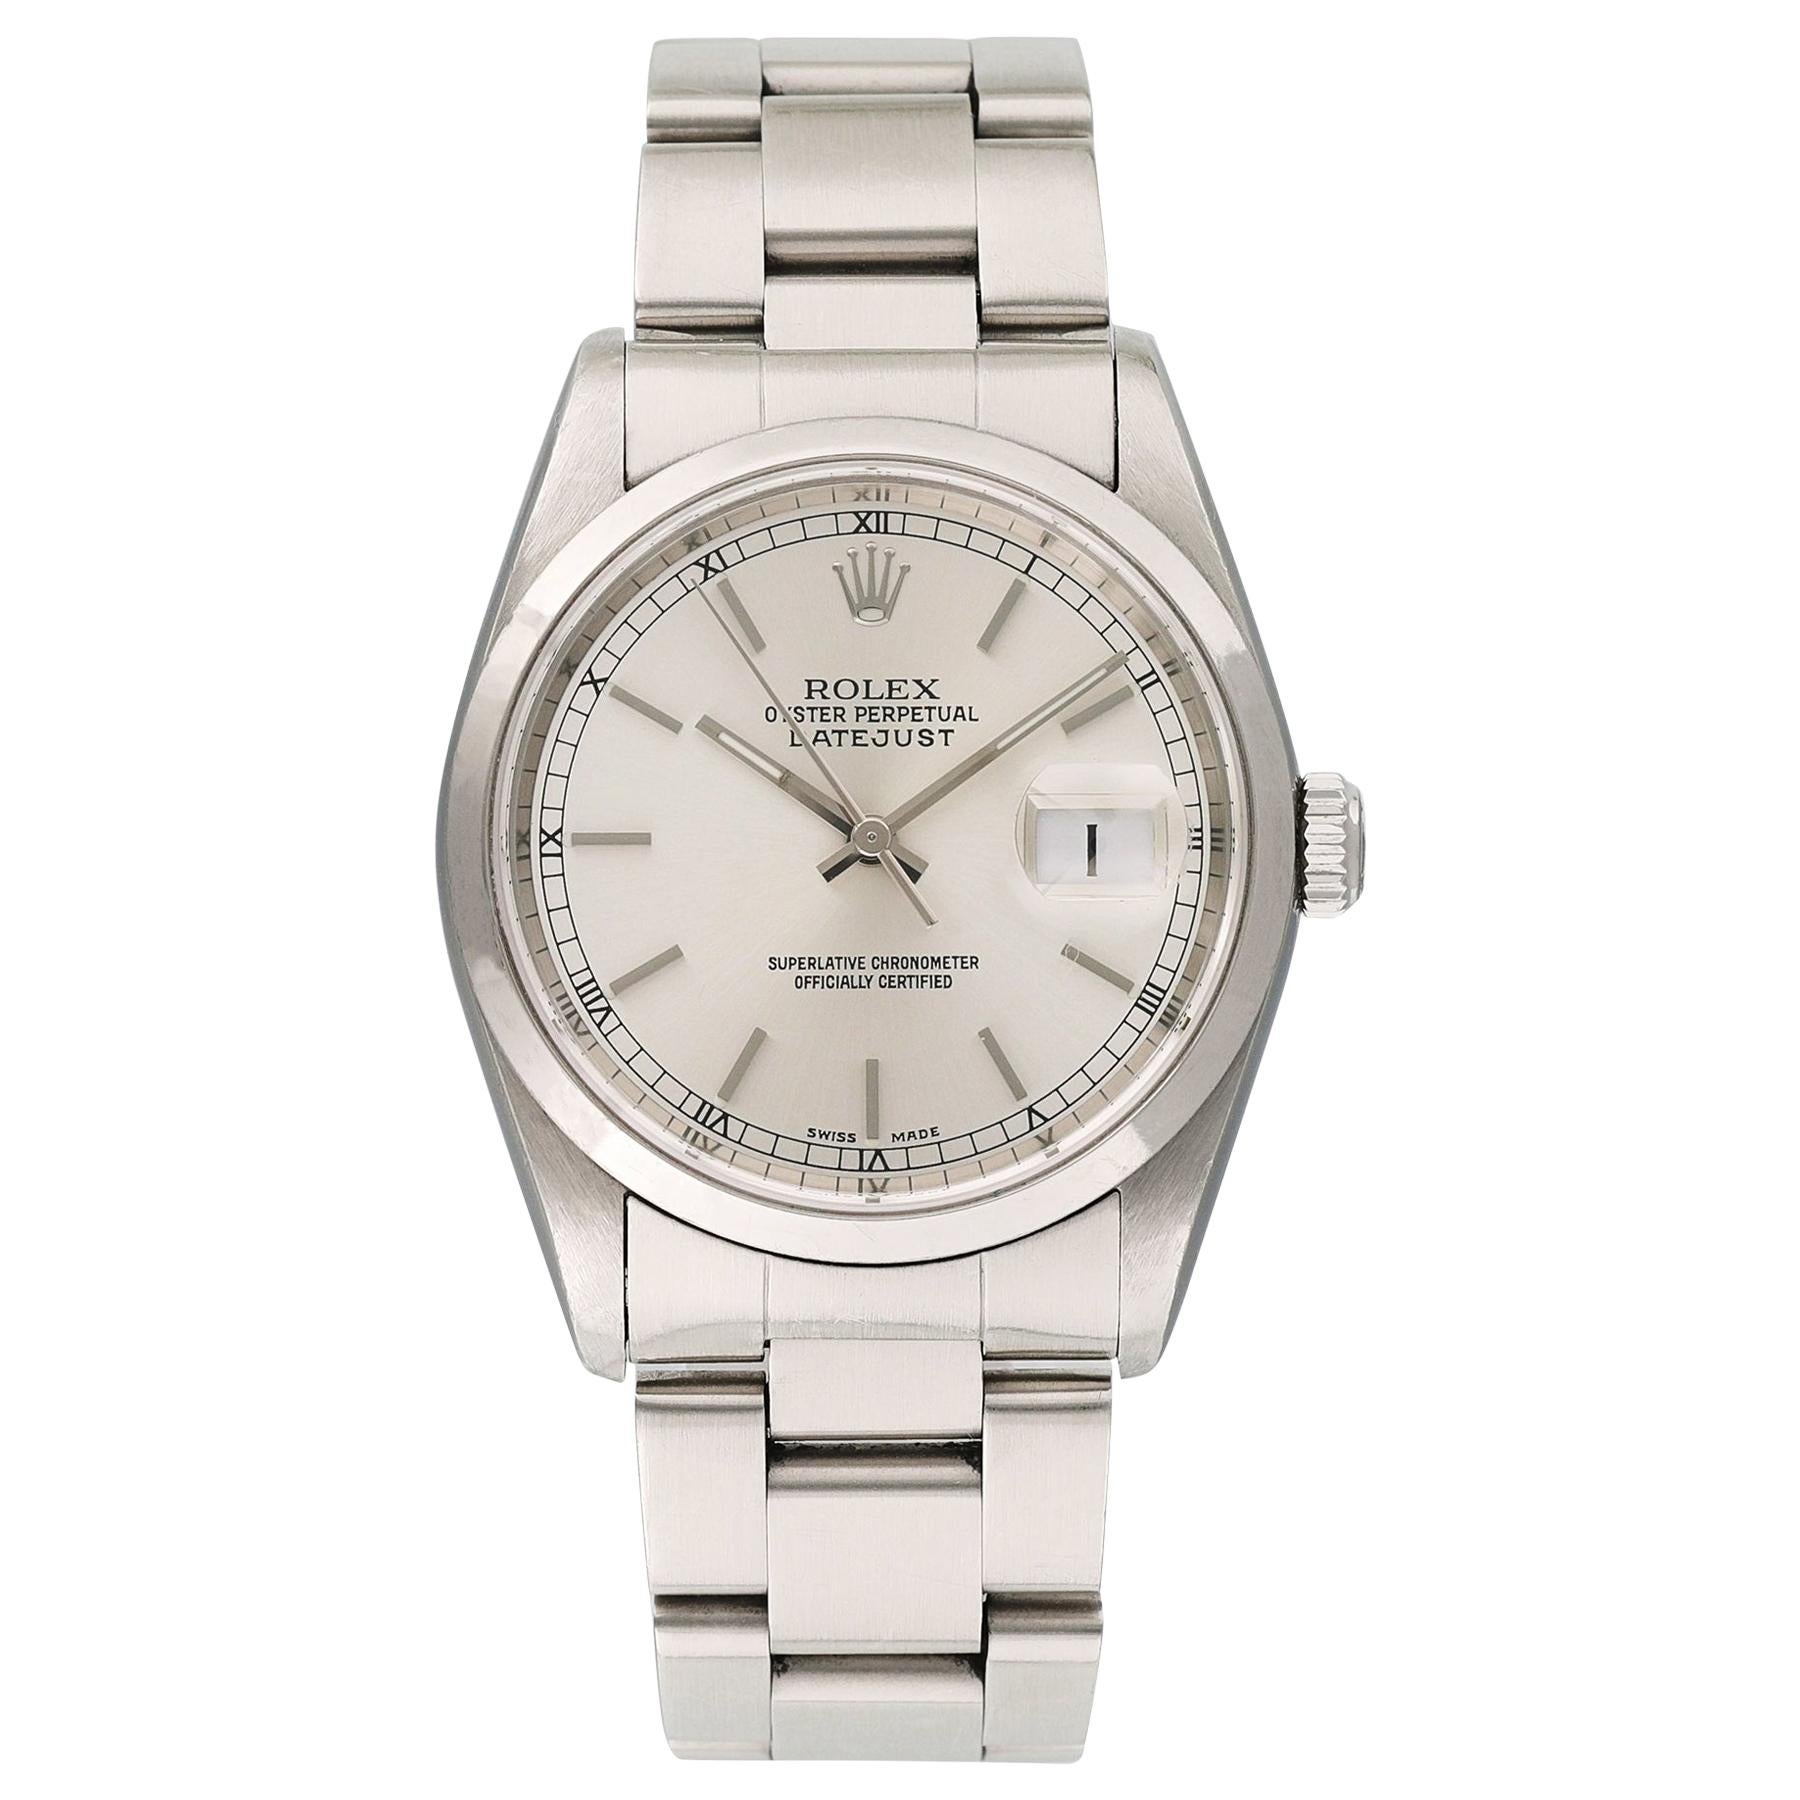 Rolex Oyster Perpetual Datejust 16200 Men's Watch For Sale